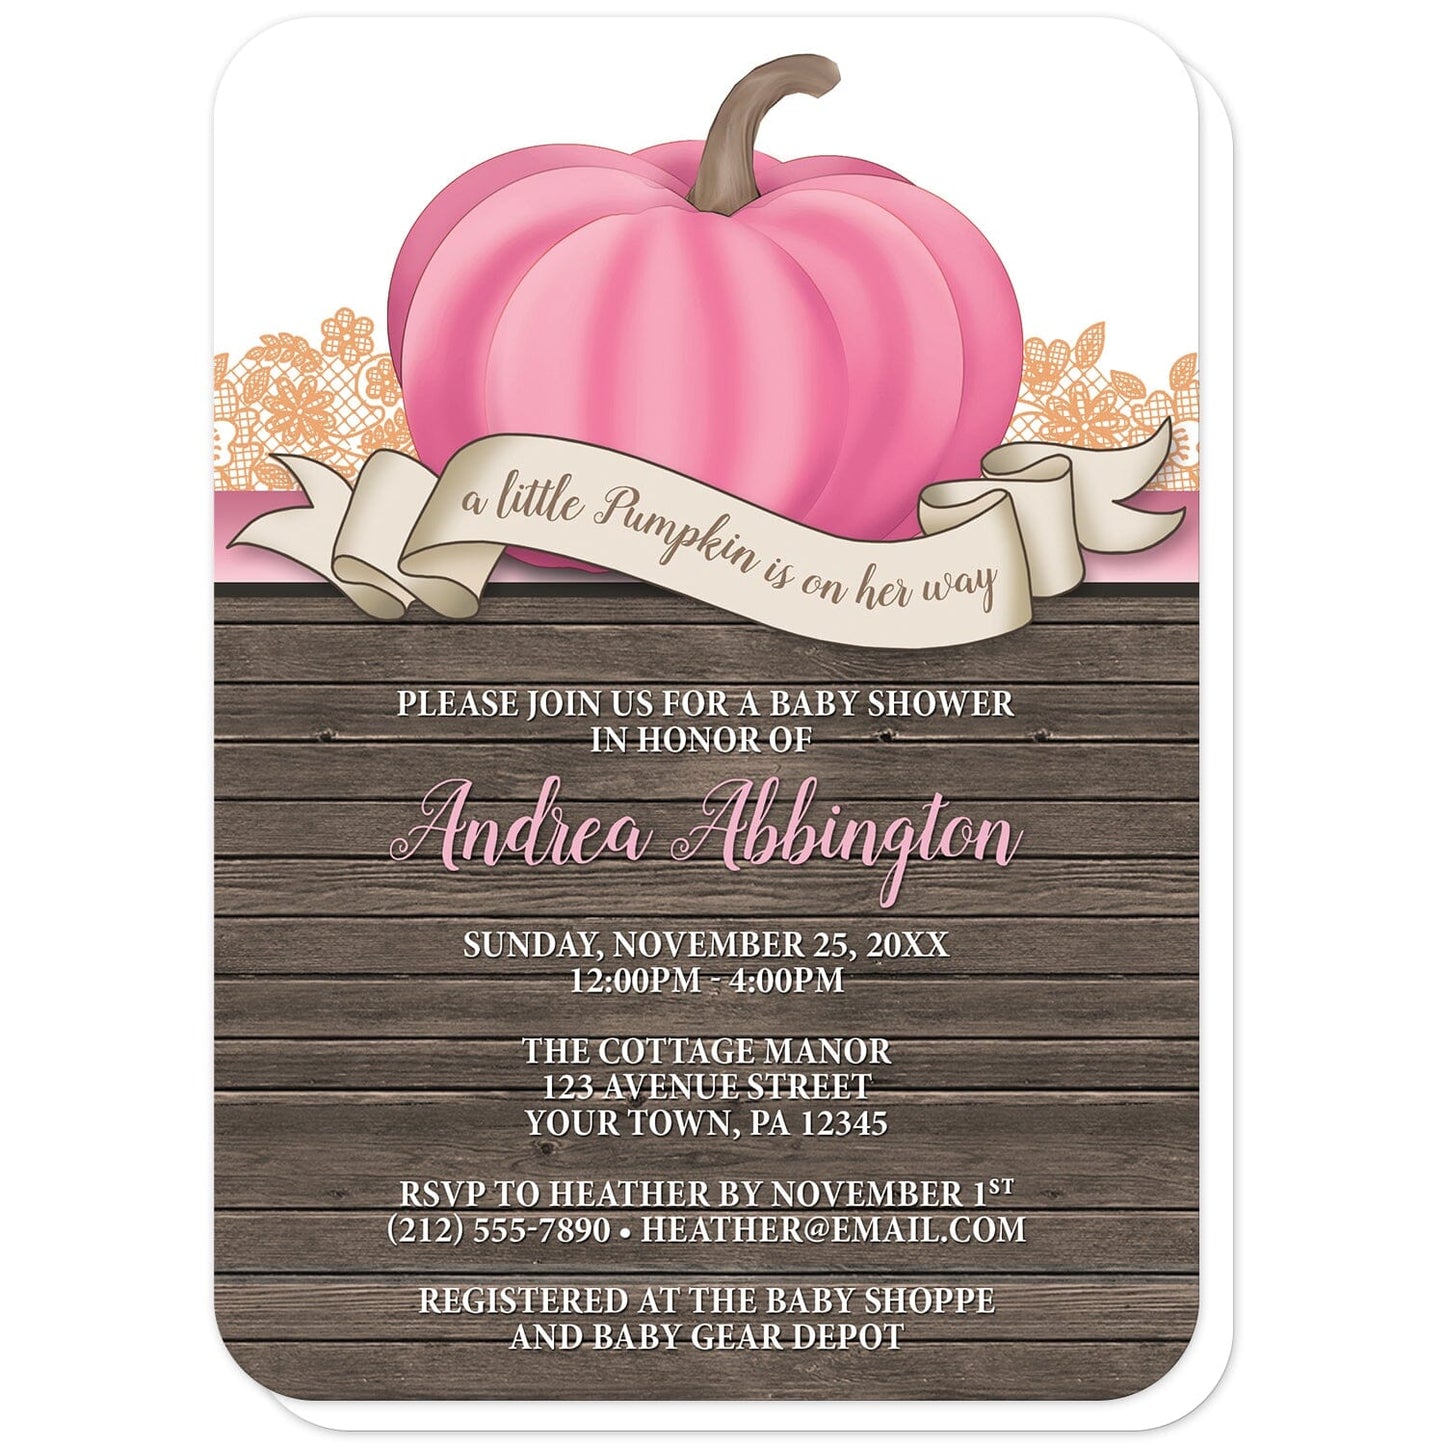 Rustic Pink Pumpkin Baby Shower Invitations (with rounded corners) at Artistically Invited. Rustic pink pumpkin baby shower invitations with an illustration of a pink-colored pumpkin over wood and a beige ribbon banner that reads: "a little pumpkin is on her way". This cute pumpkin drawing is set on a horizontal pink stripe with orange lace. The personalized baby shower celebration details you provide will be custom printed in pink and white over a country brown wood background below the pink pumpkin.